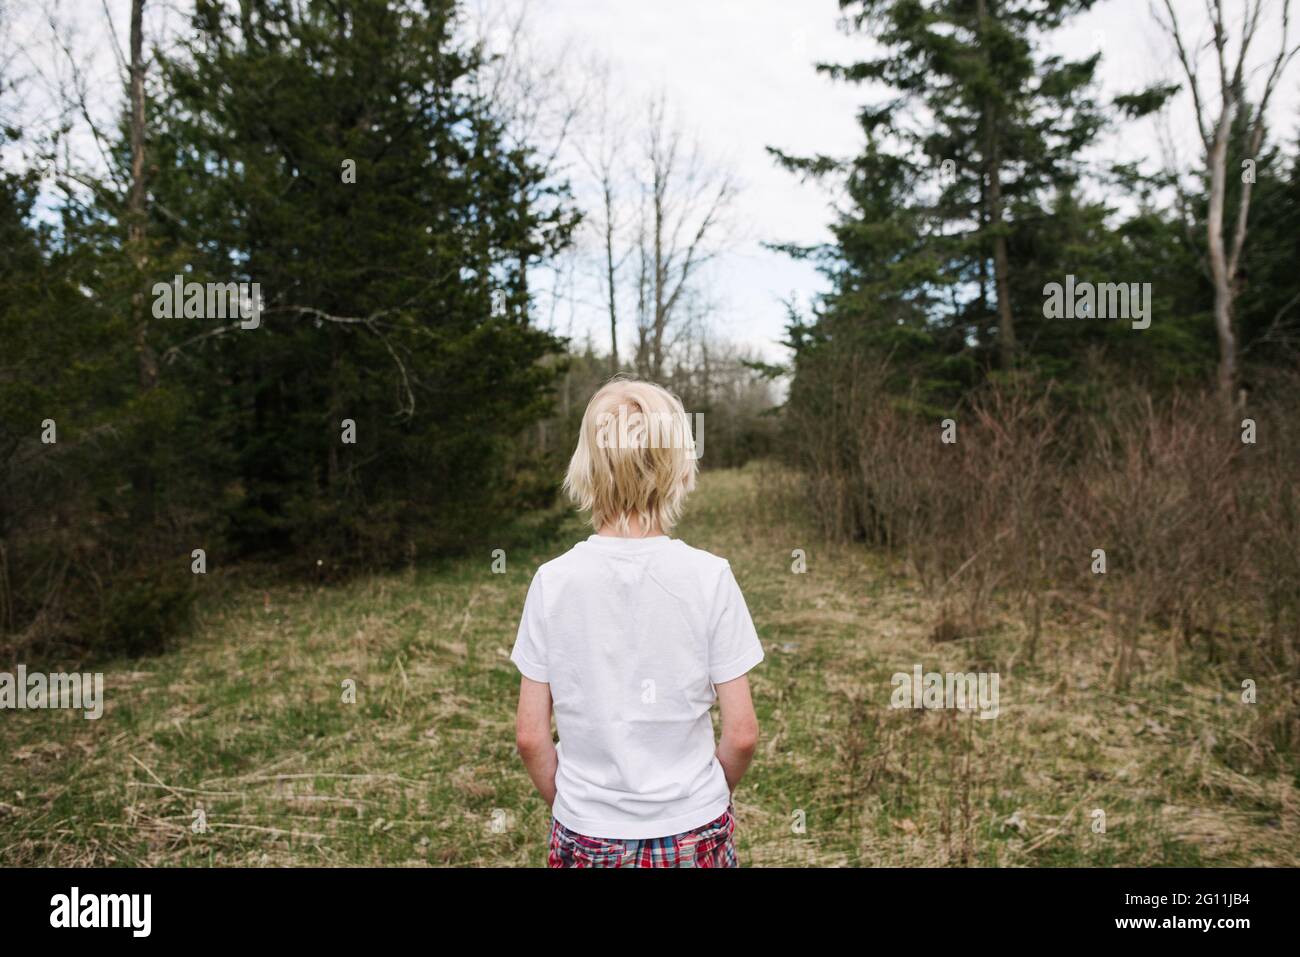 Canada, Ontario, Kingston, Rear view of boy in forest Stock Photo